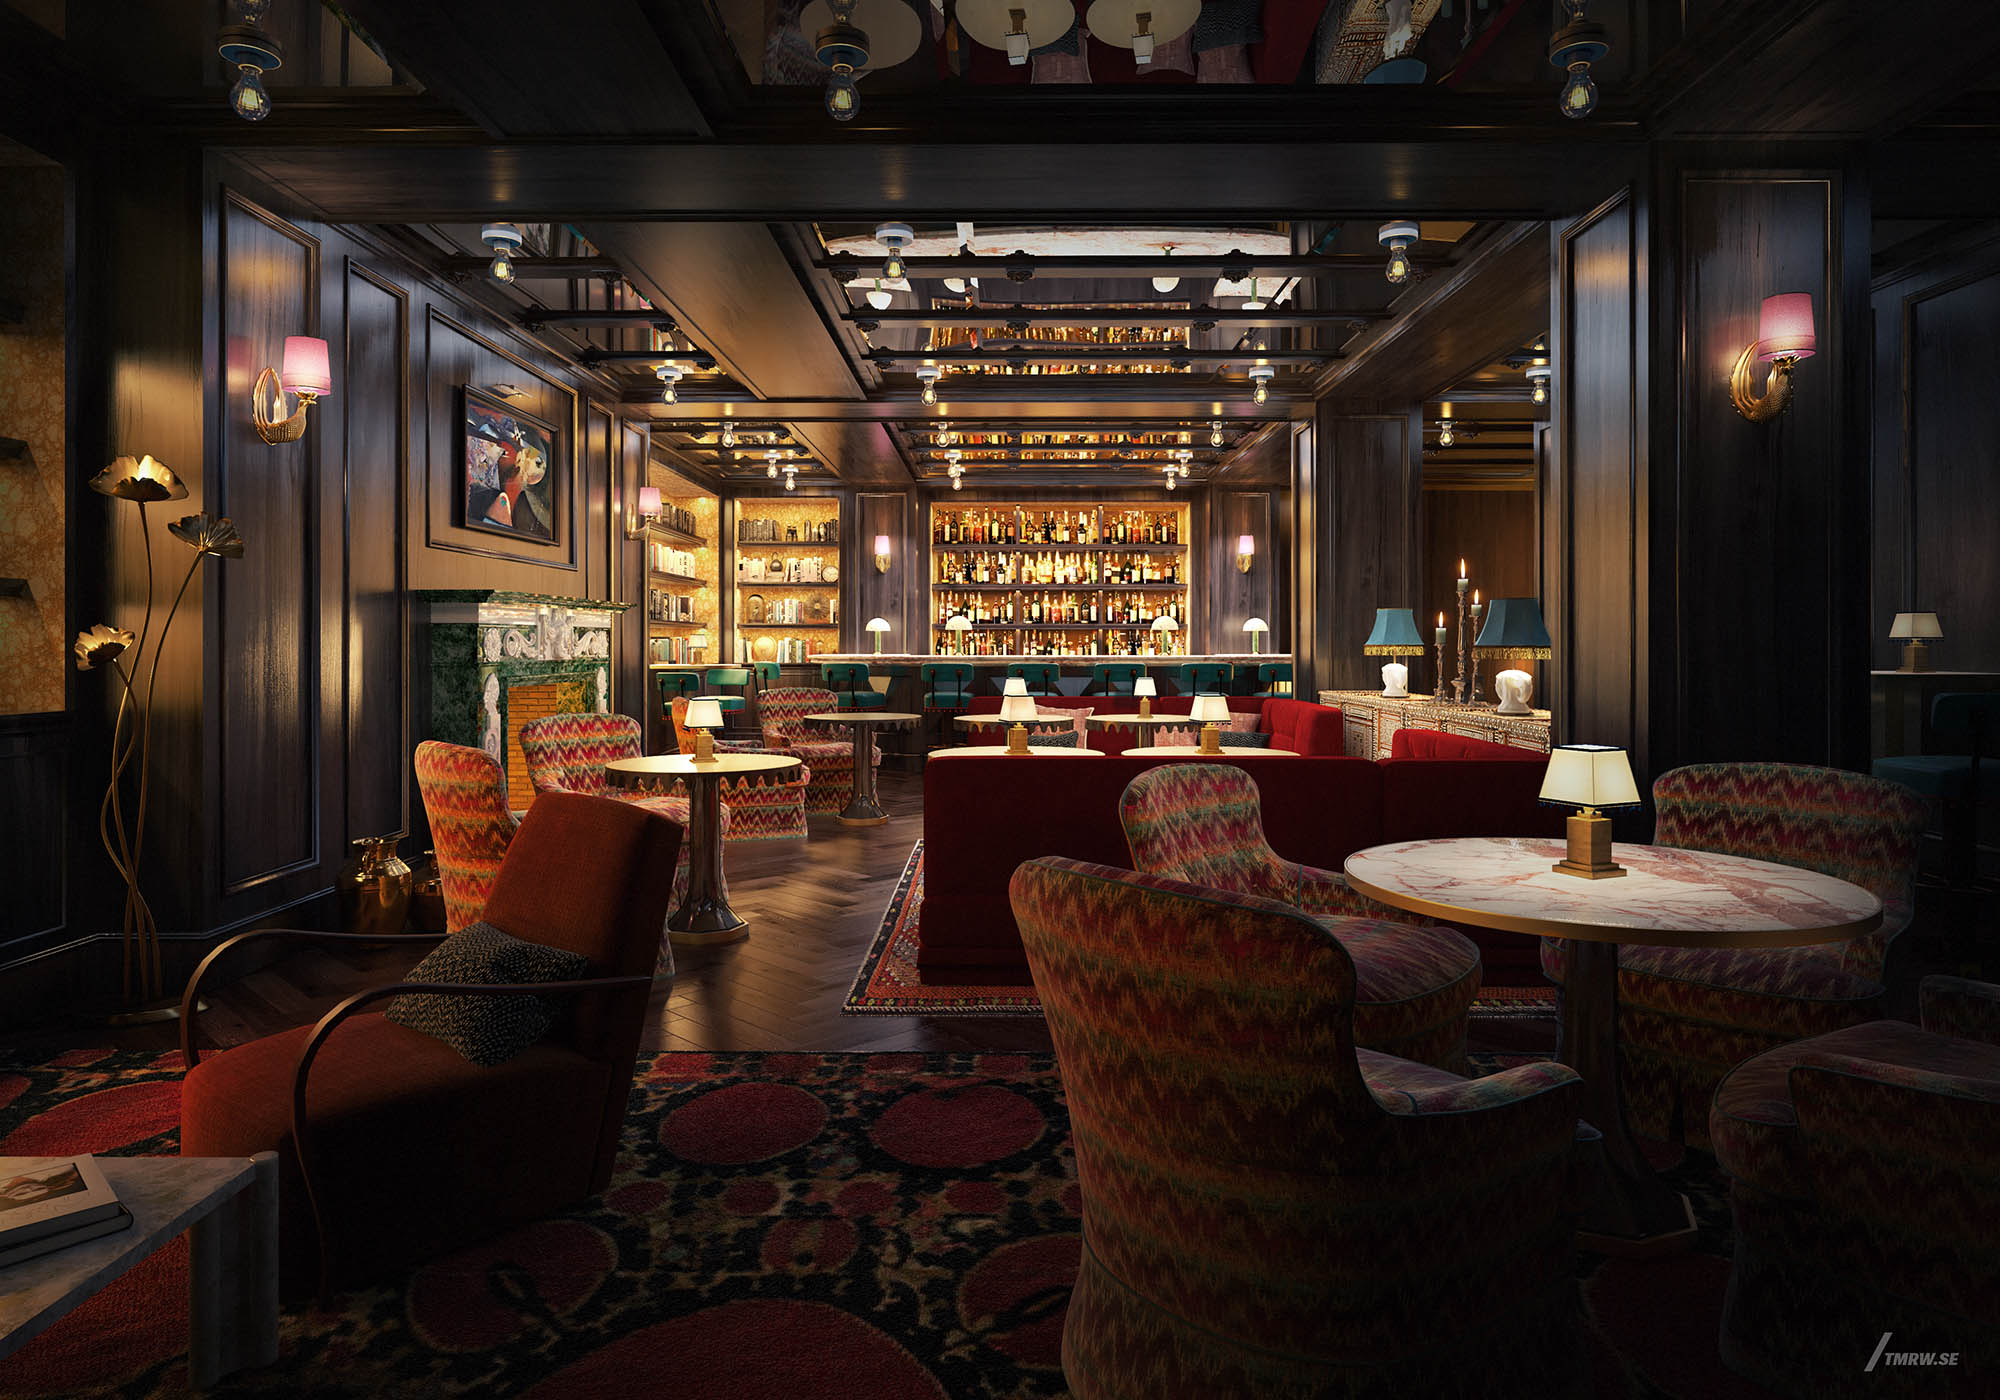 Architectural visualization of Flaneur Hospitality for Empire Managment a bar area emplty of people in cosy evening light form an interior view.